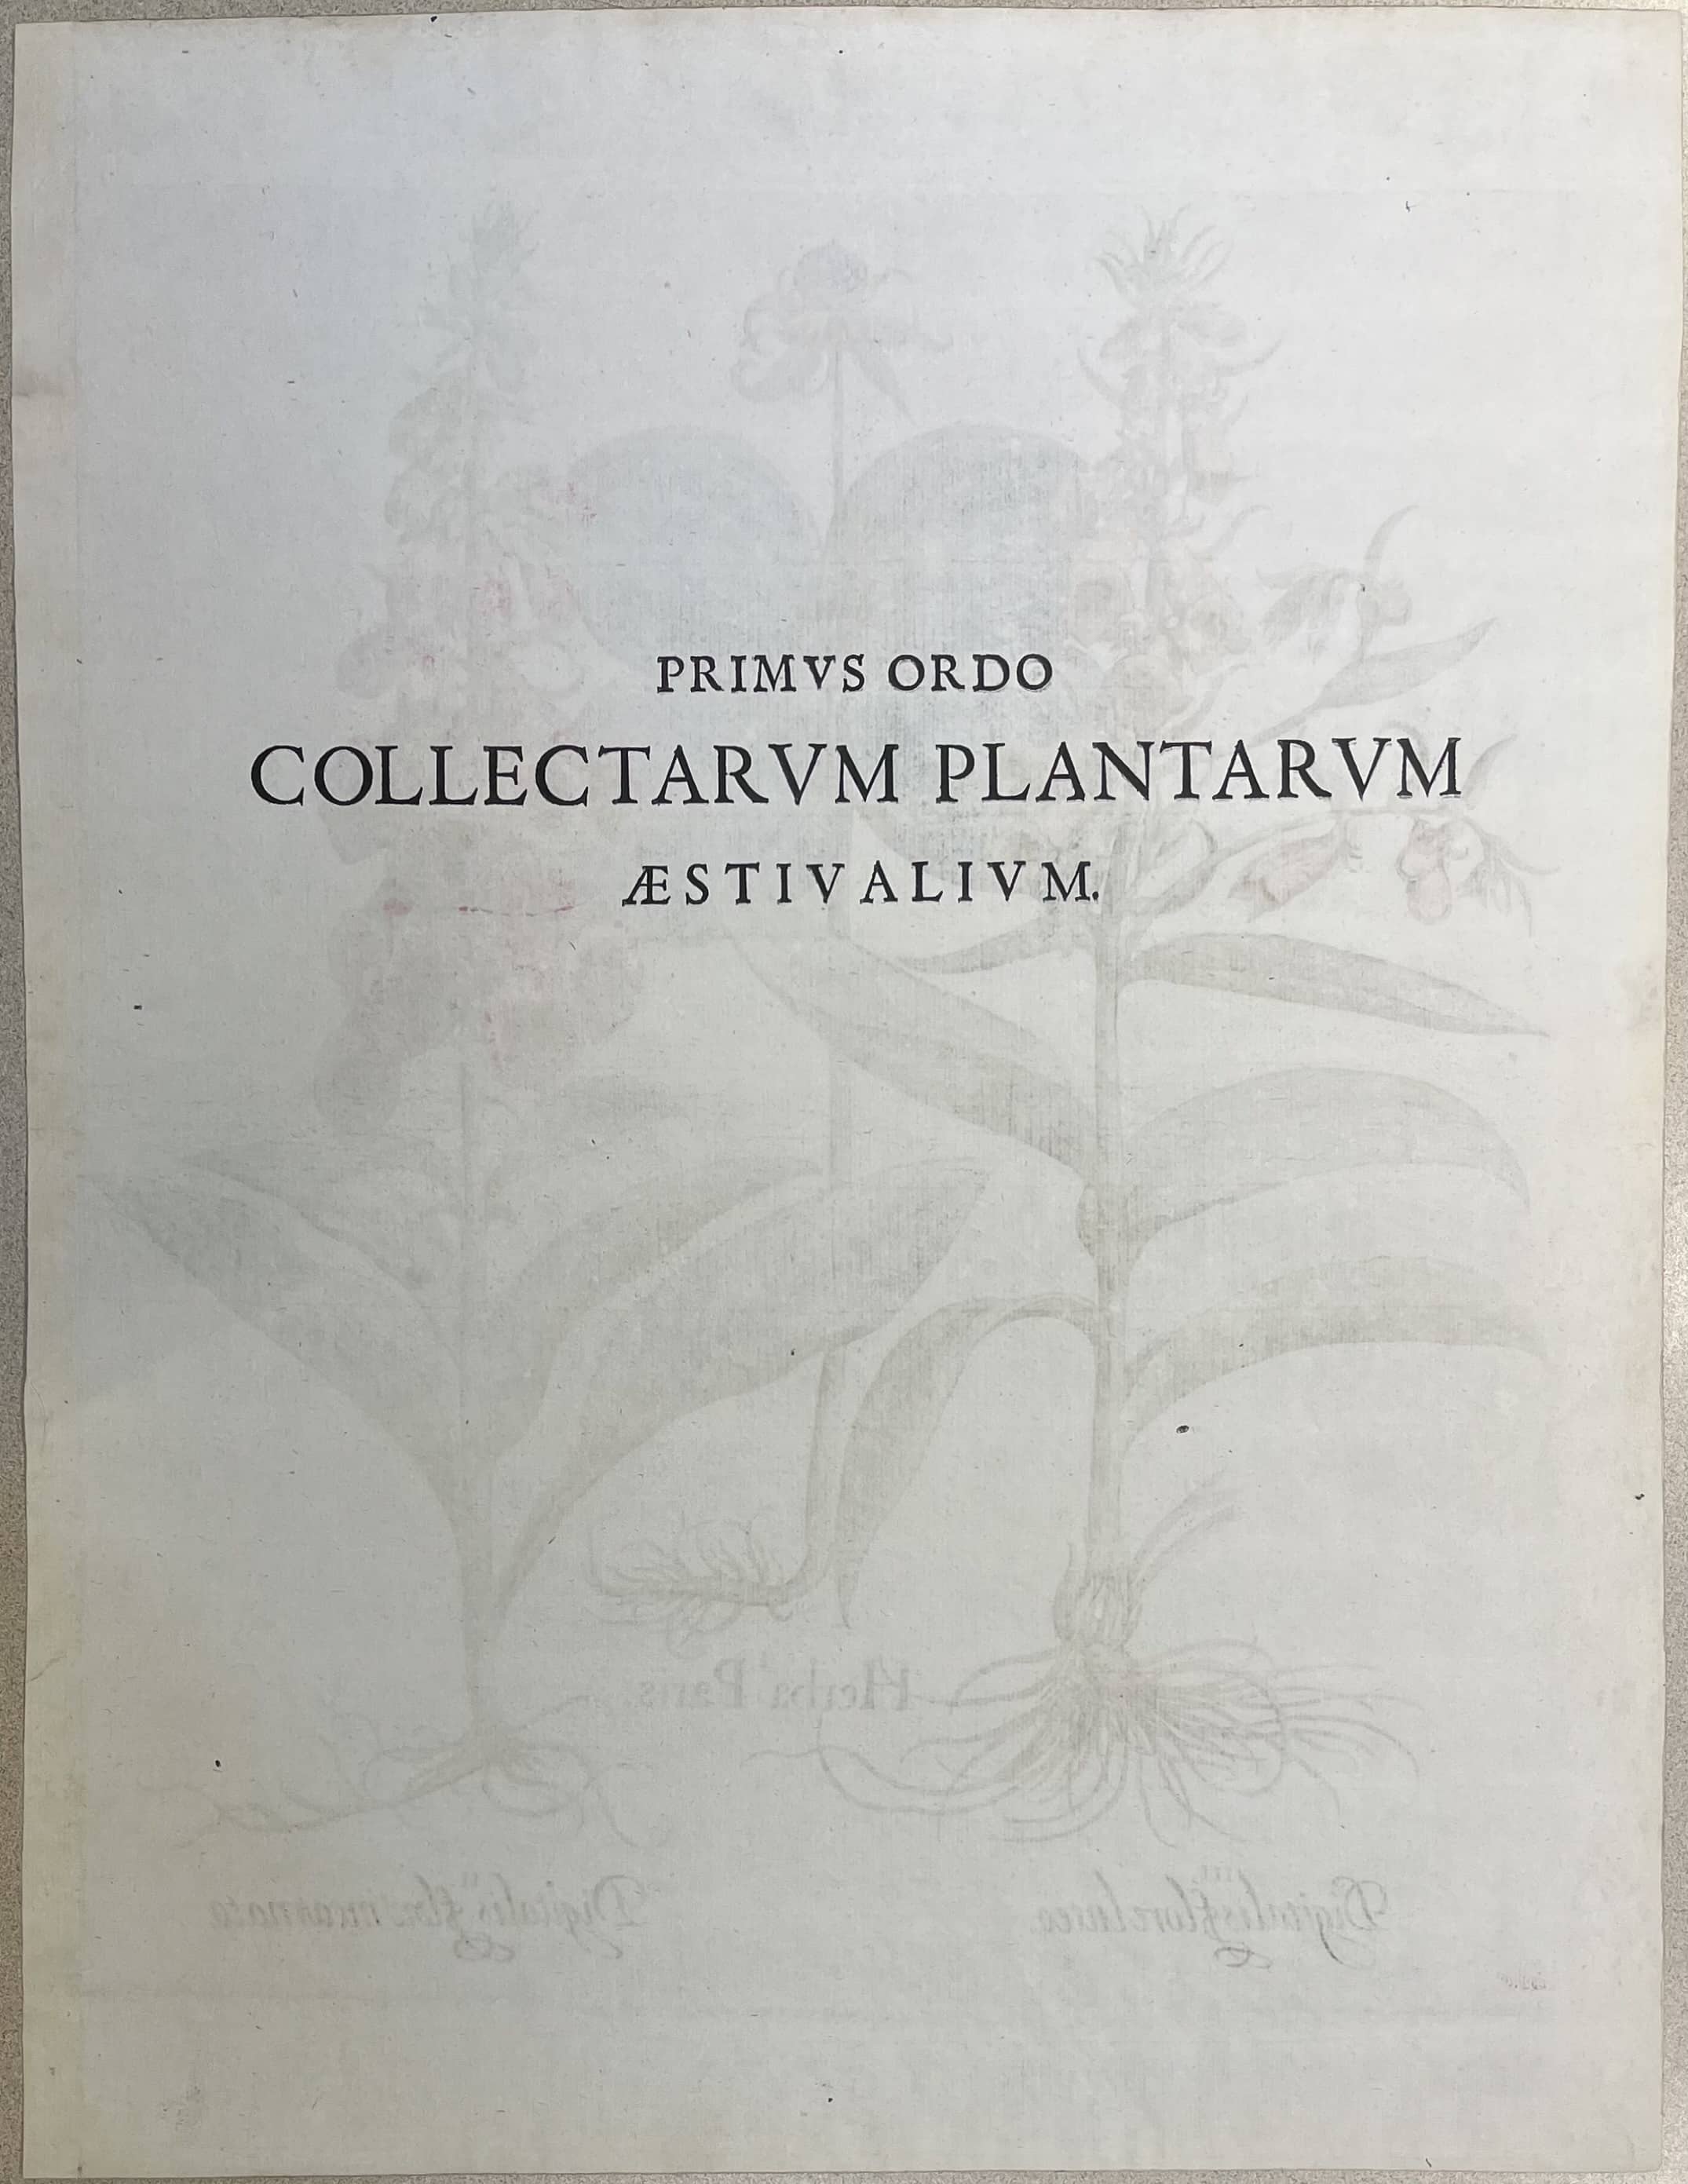 While the Deluxe edition prints do not have the corresponding text on the verso, a number of the prints do have half-titles printed on the verso.